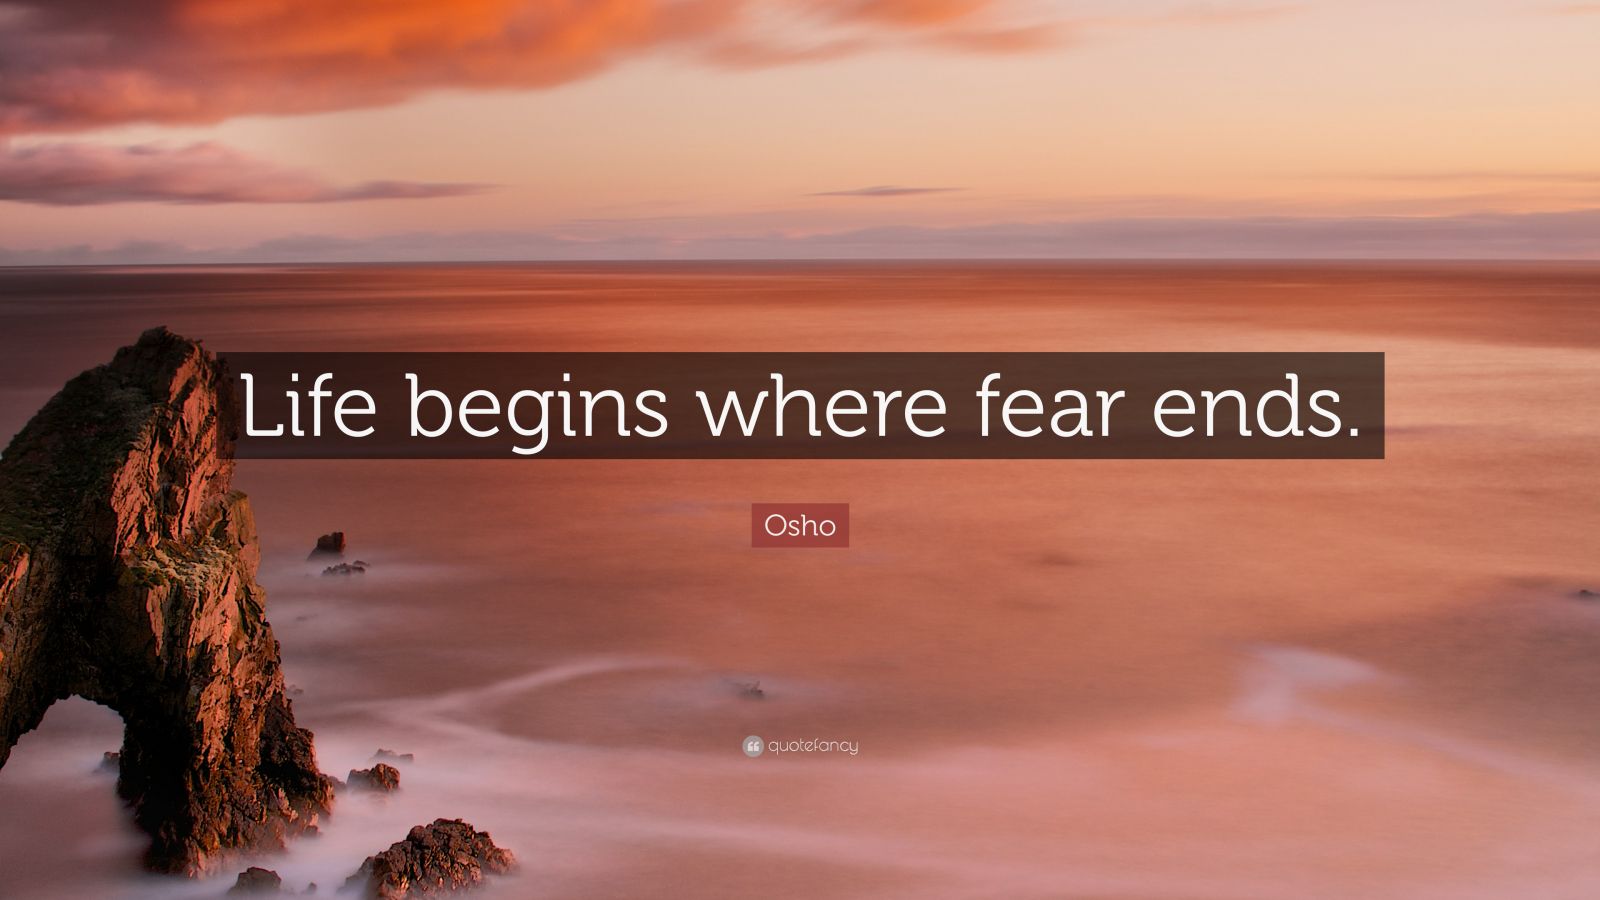 Osho Quote: “Life begins where fear ends.” (29 wallpapers) - Quotefancy